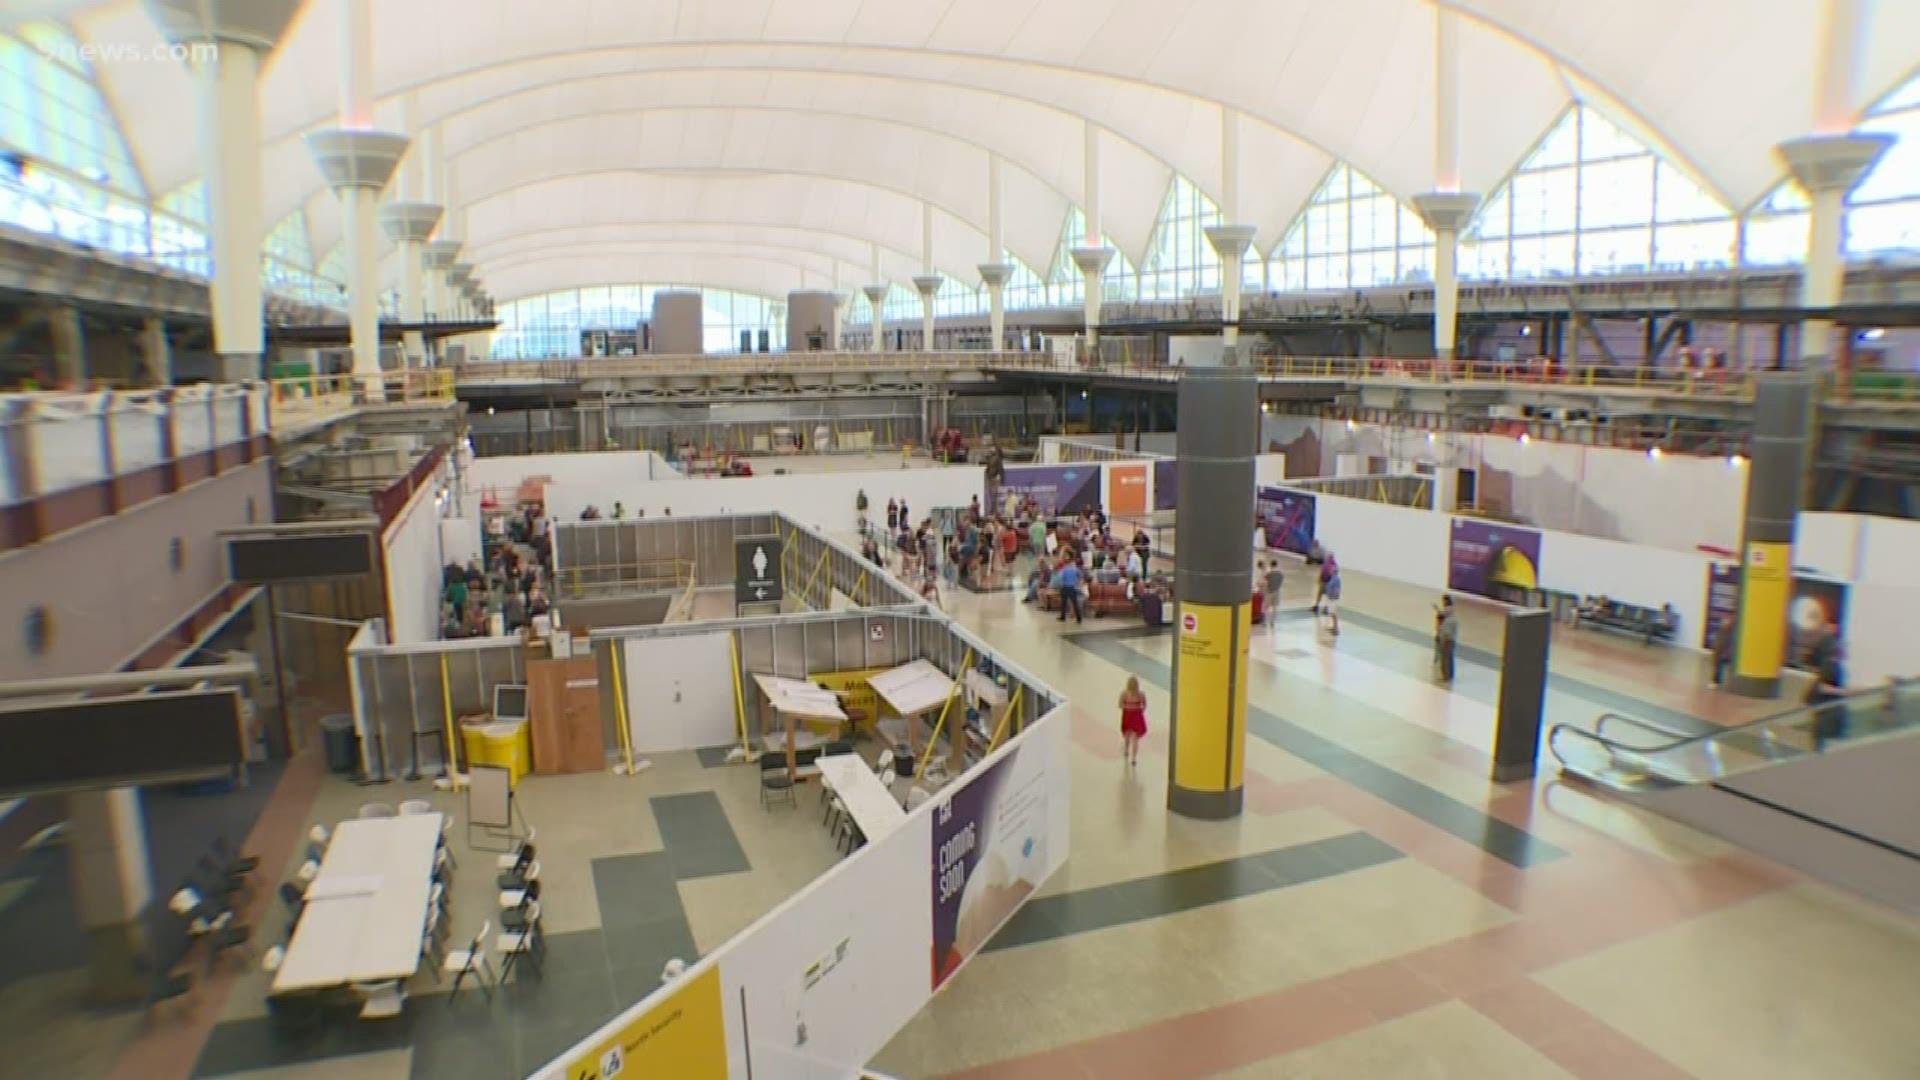 DIA said Great Hall Partners shouldn't get more time for the construction project.